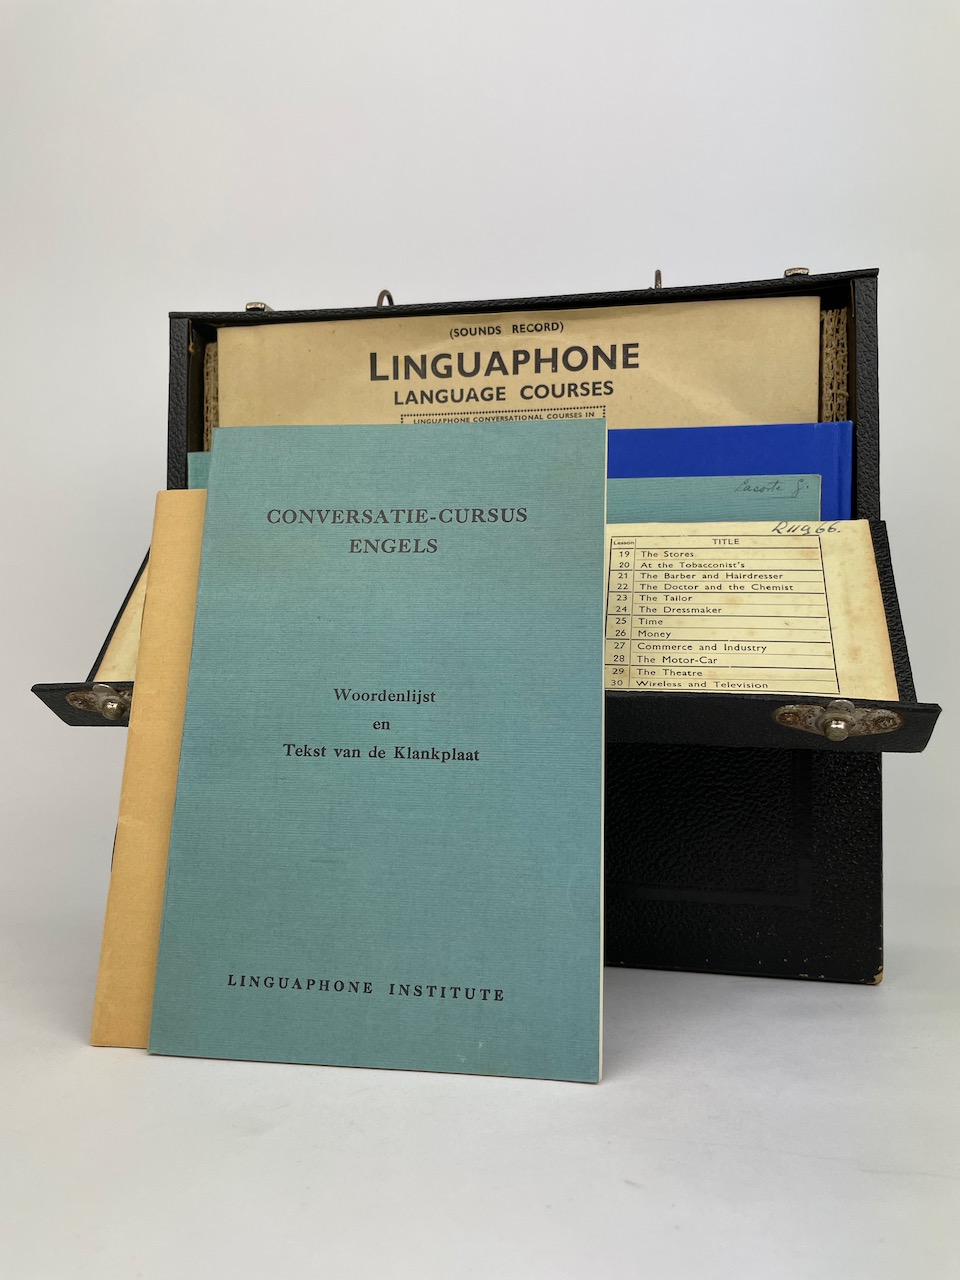 Linguaphone Conversational Course English - Complete set - 16 records and 5 booklets in original box 4